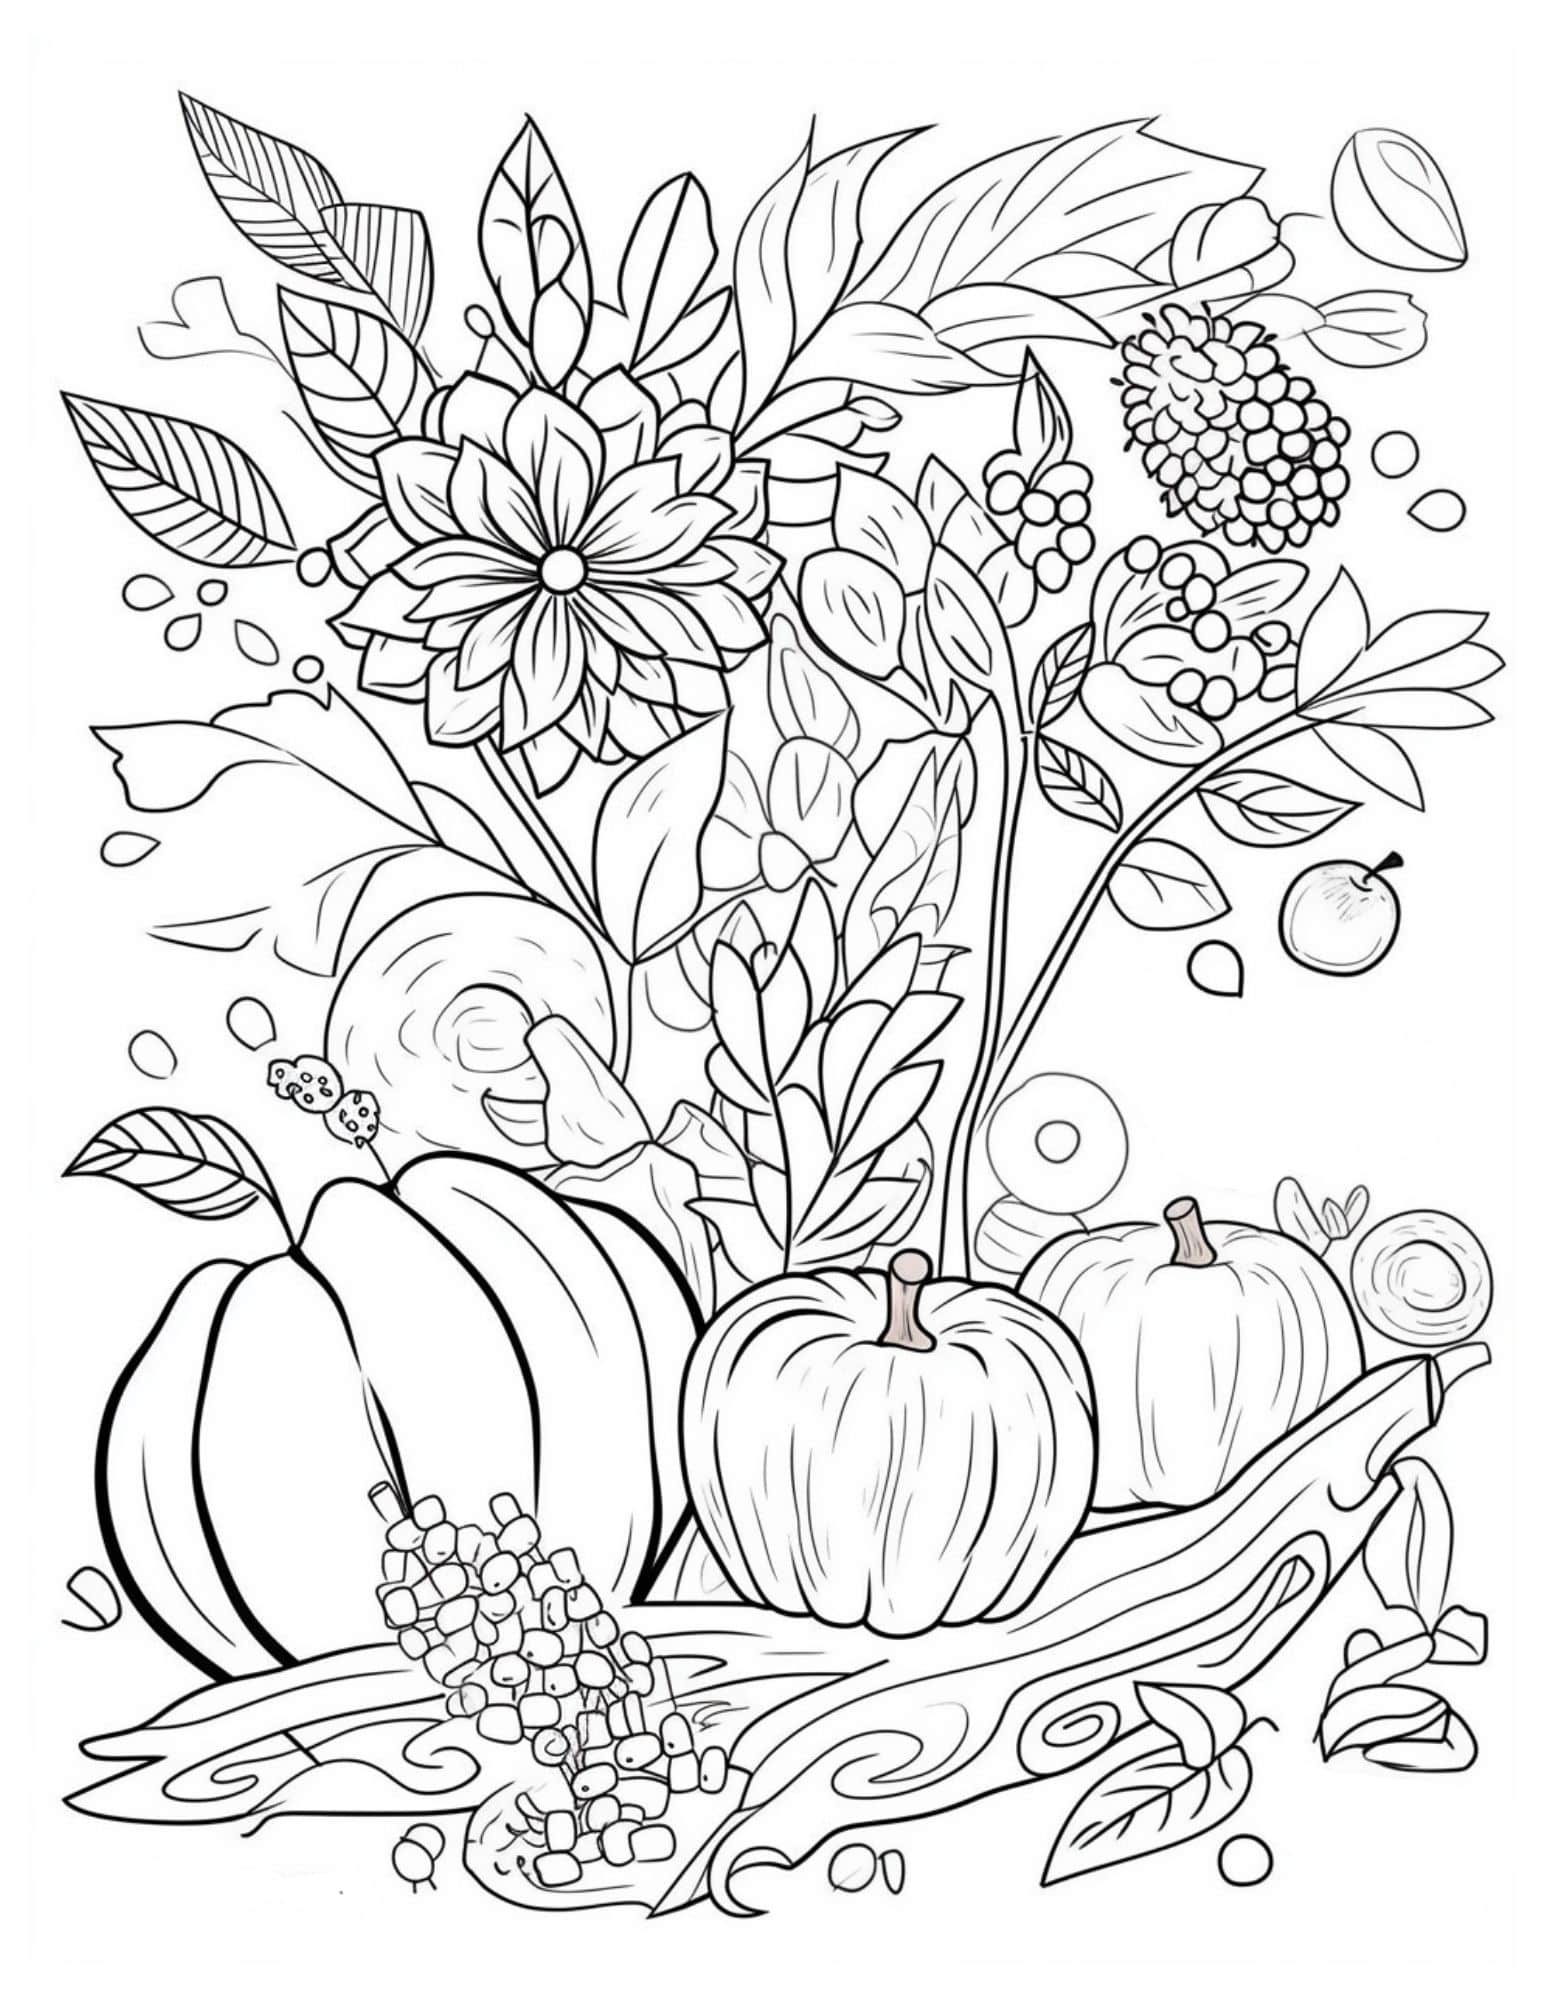 painting tool coloring page  Coloring pages, Painting tools, Painting